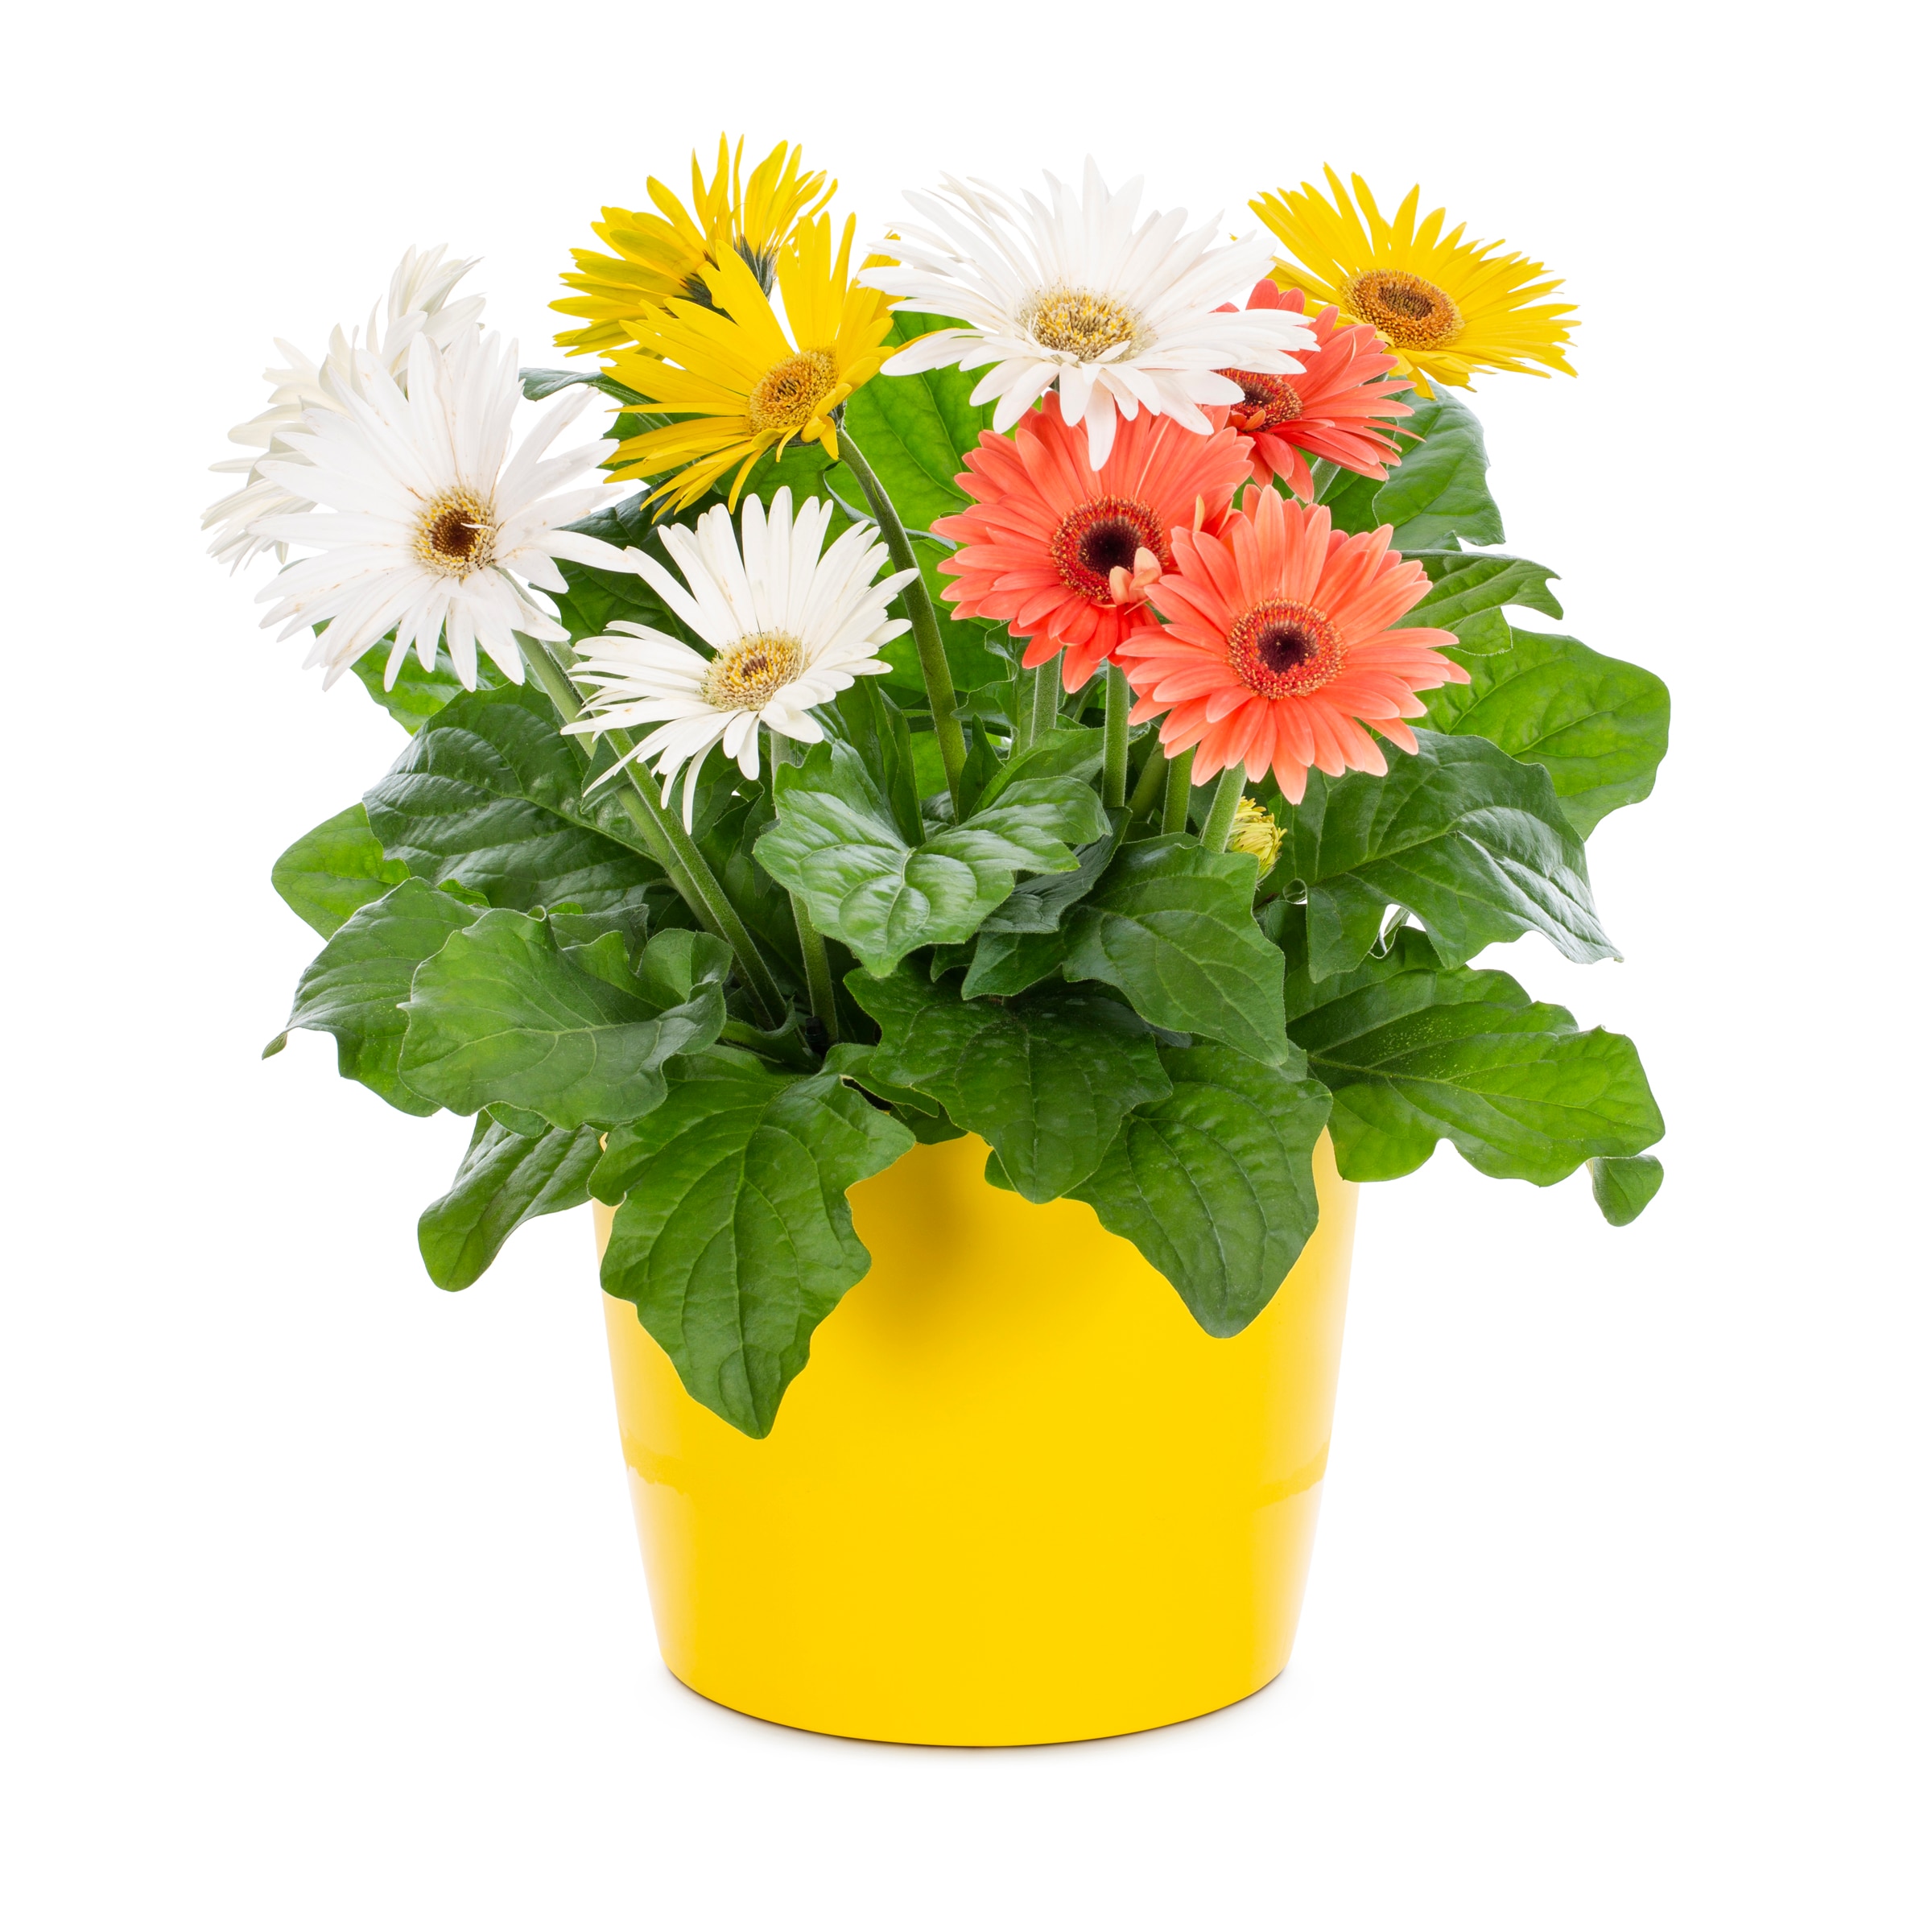 Lowe's Multicolor Gerbera Daisy in 3-Quart Planter in the department at Lowes.com